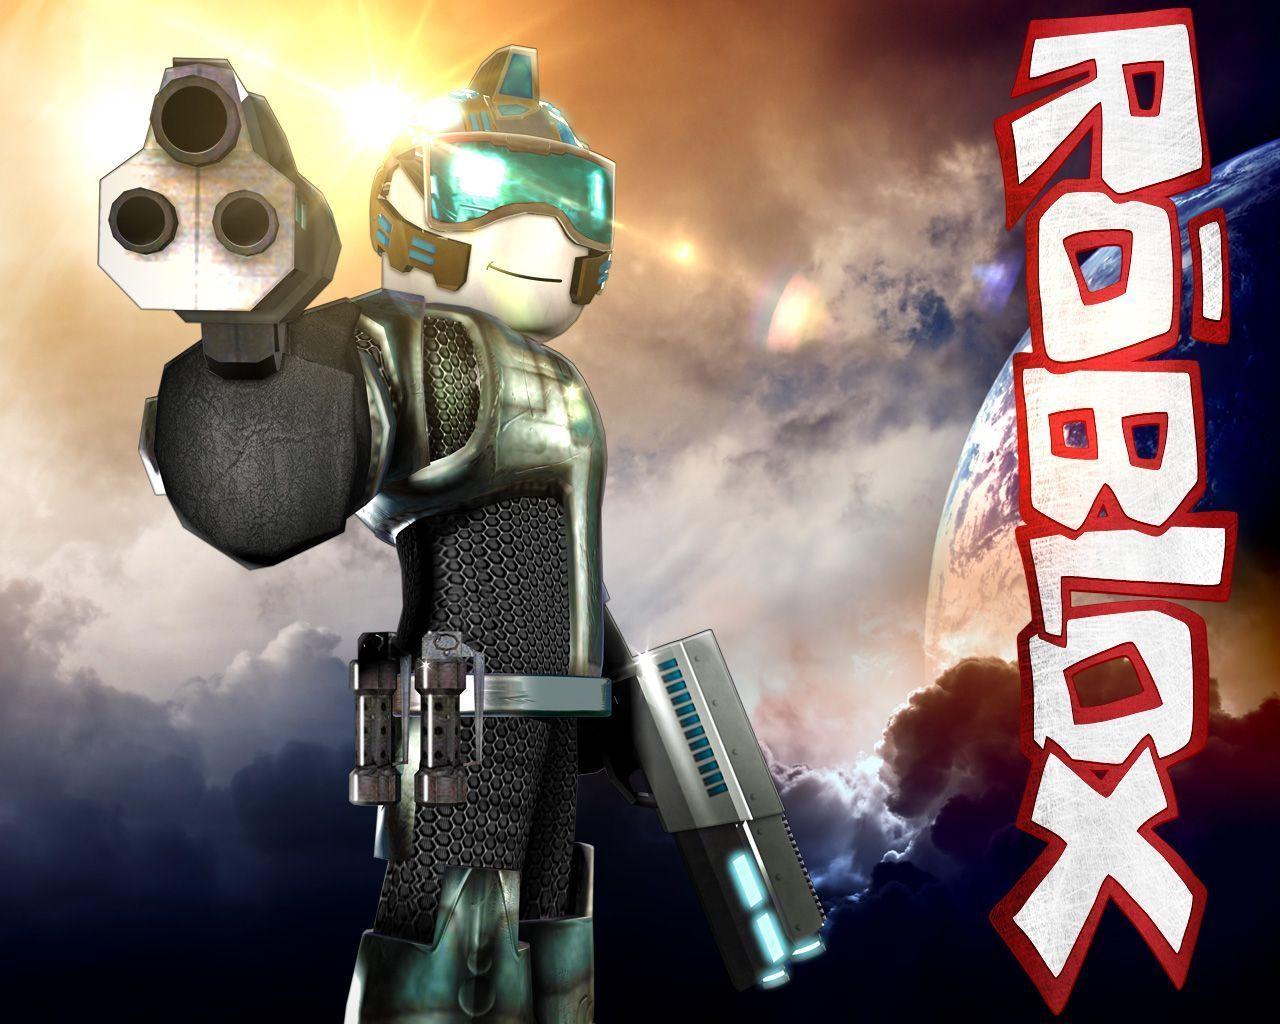 Awesome Roblox Wallpapers Top Free Awesome Roblox Backgrounds Wallpaperaccess - 1080p roblox background hd